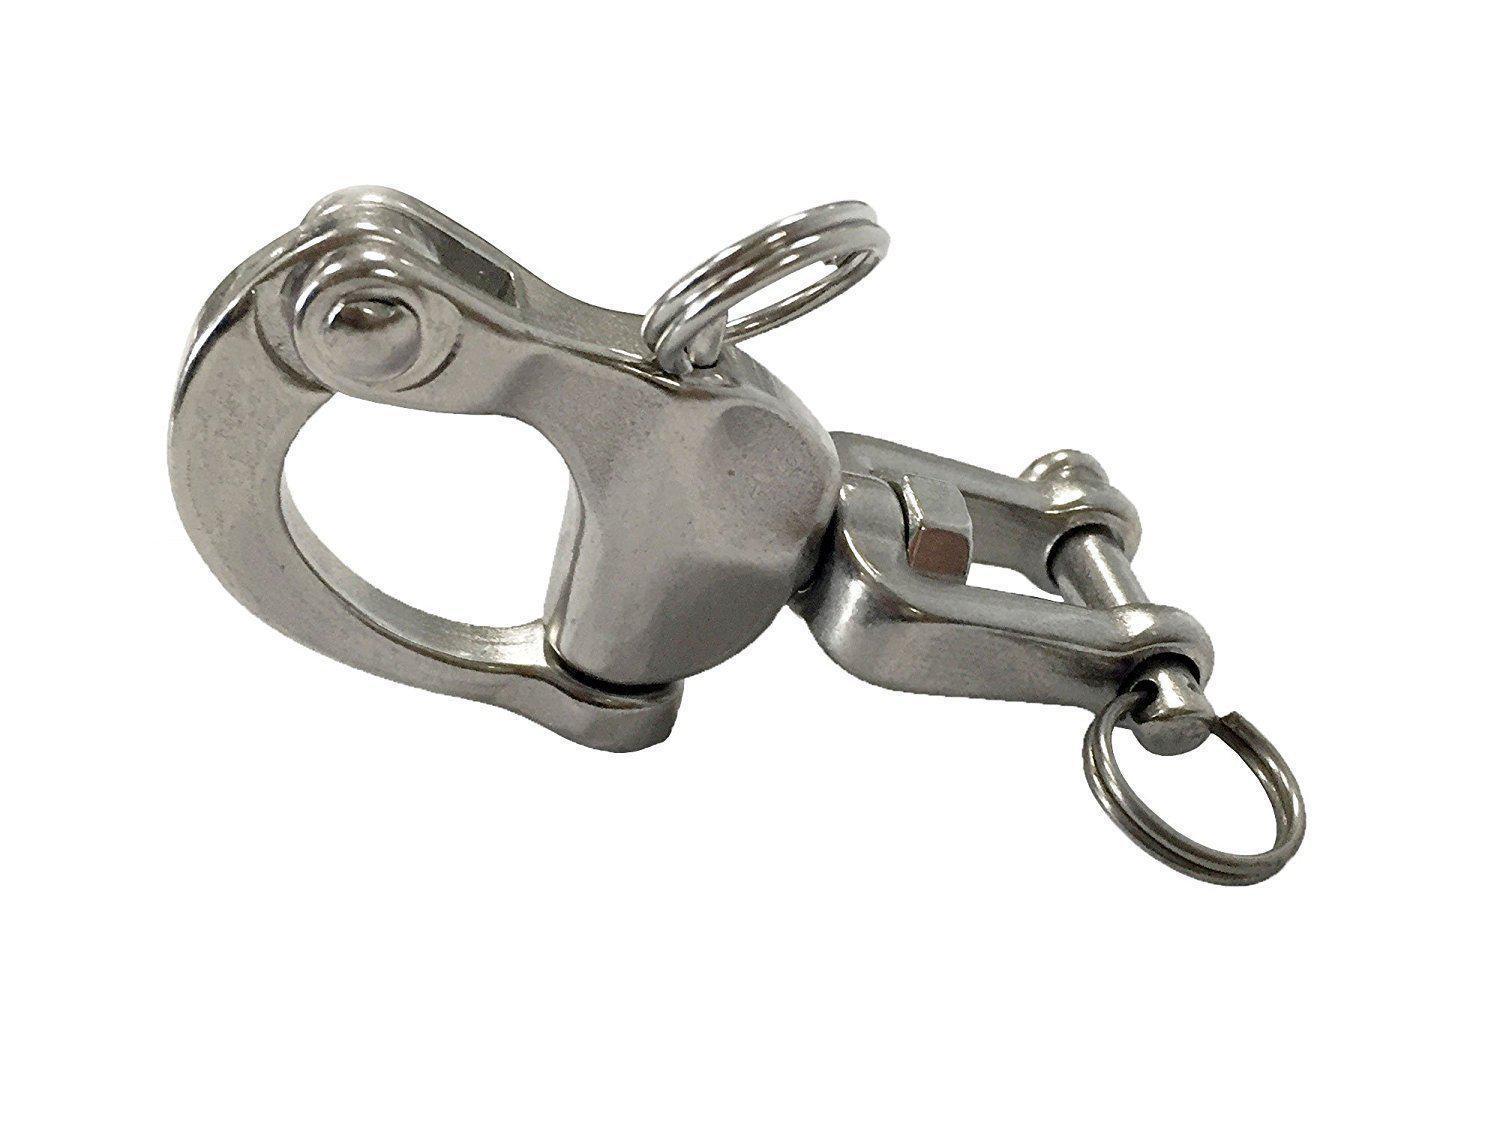 2-3/4" Jaw Swivel Snap Tack Shackle for Sailboat - Stainless Steel (SET OF 4) - Five Oceans-Canadian Marine &amp; Outdoor Equipment